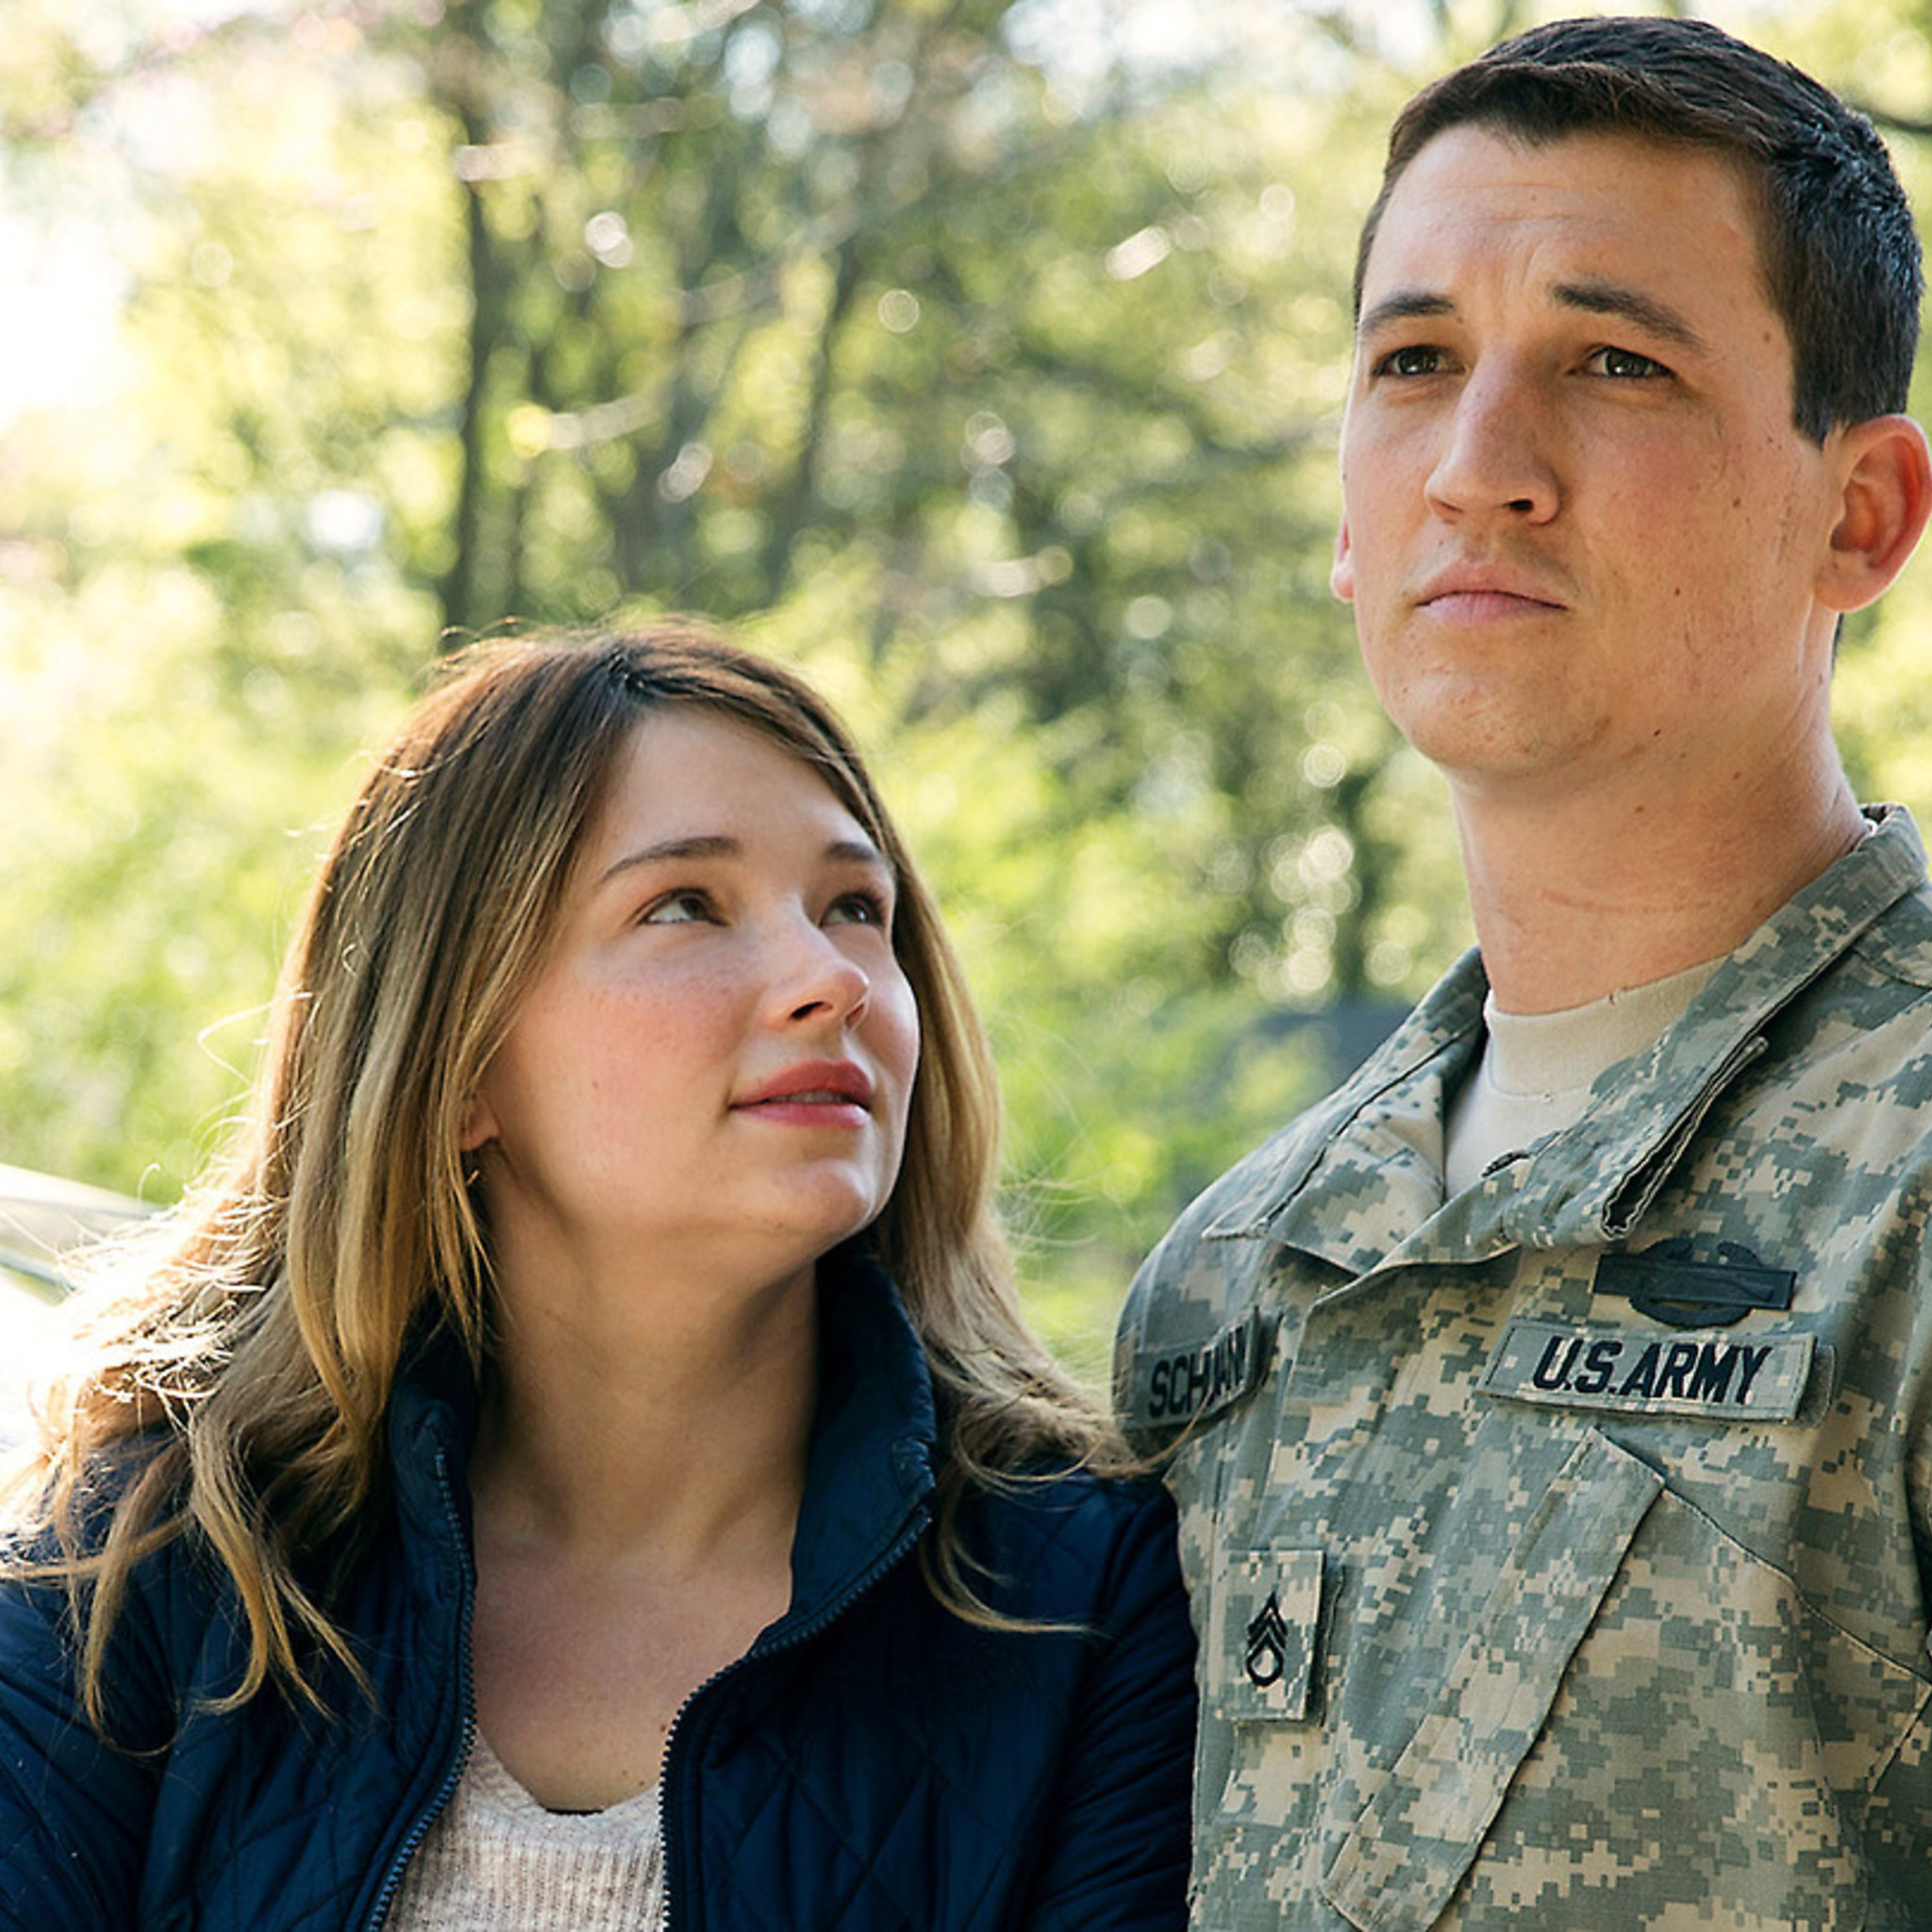 Things Vets SHOULD KNOW BEFORE watching ”Thank You for Your Service”